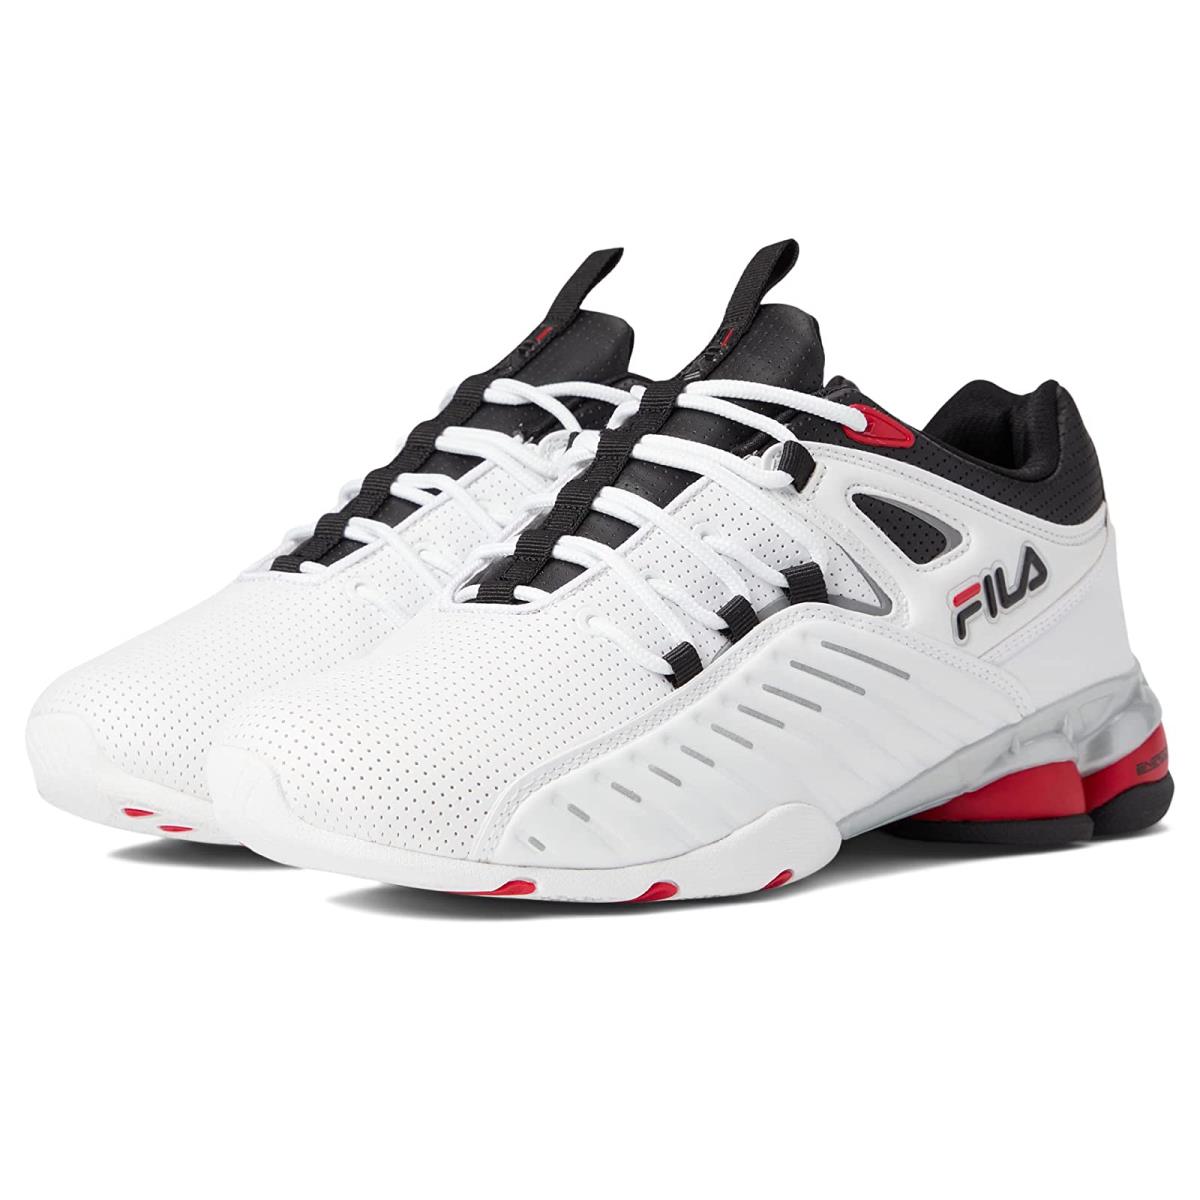 Man`s Sneakers Athletic Shoes Fila Sonic Fuel Re-energized White/Black/Fila Red